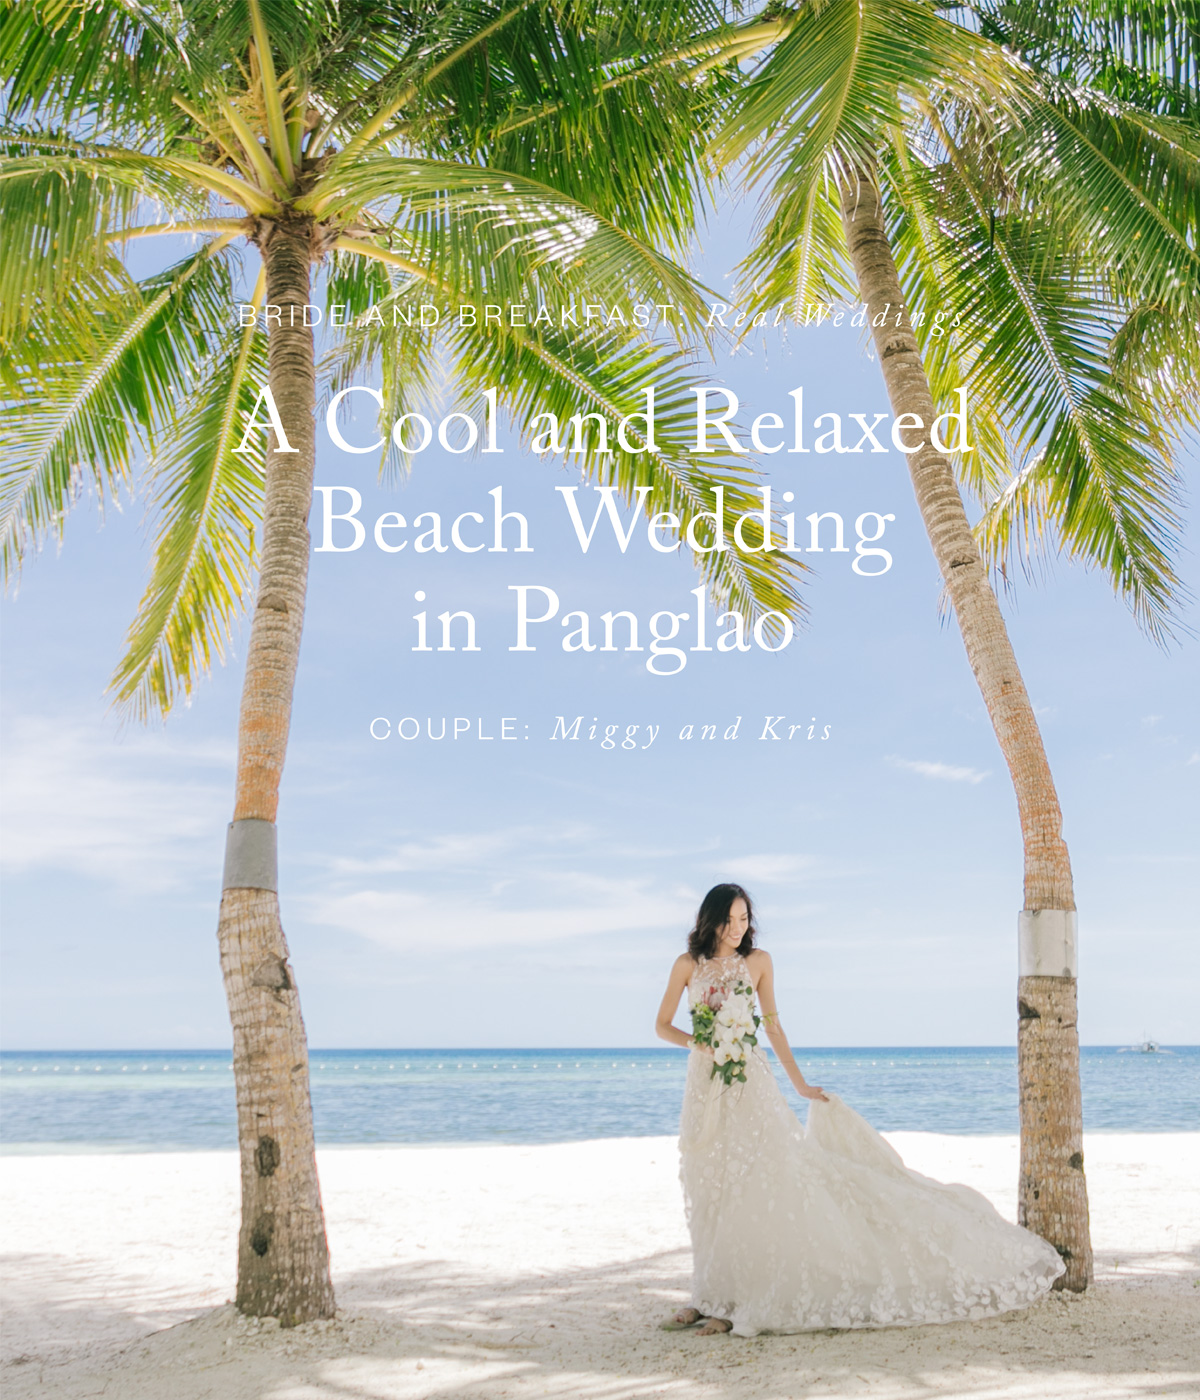 A Cool and Relaxed Beach Wedding in Panglao